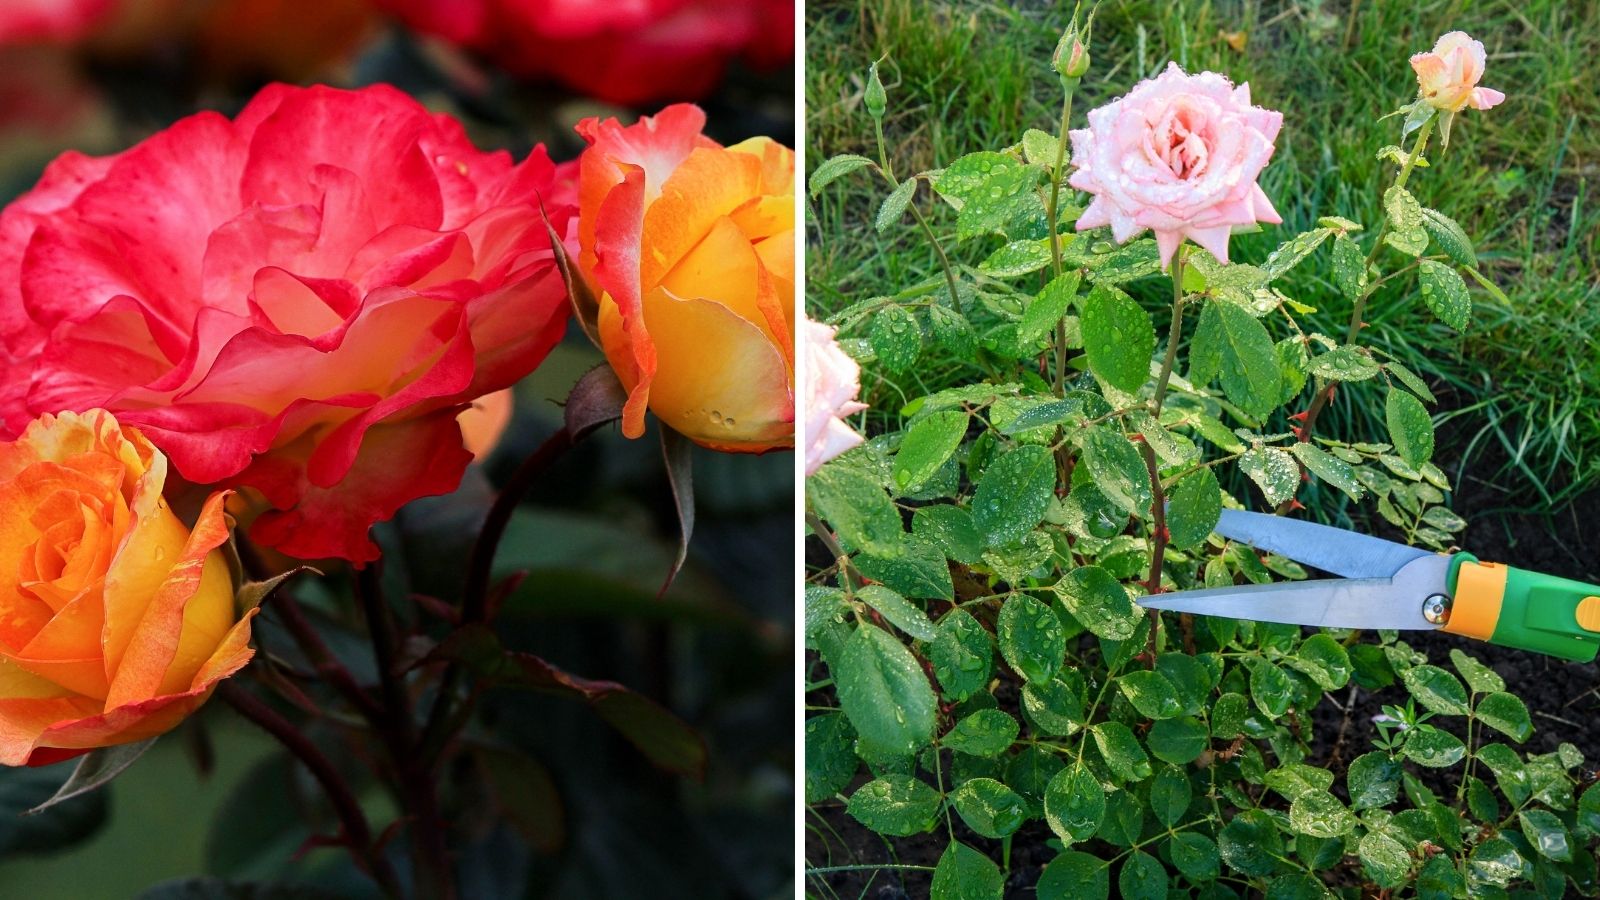 A Guide to Prune Rose Bushes: How and When to do it - Garden Beds